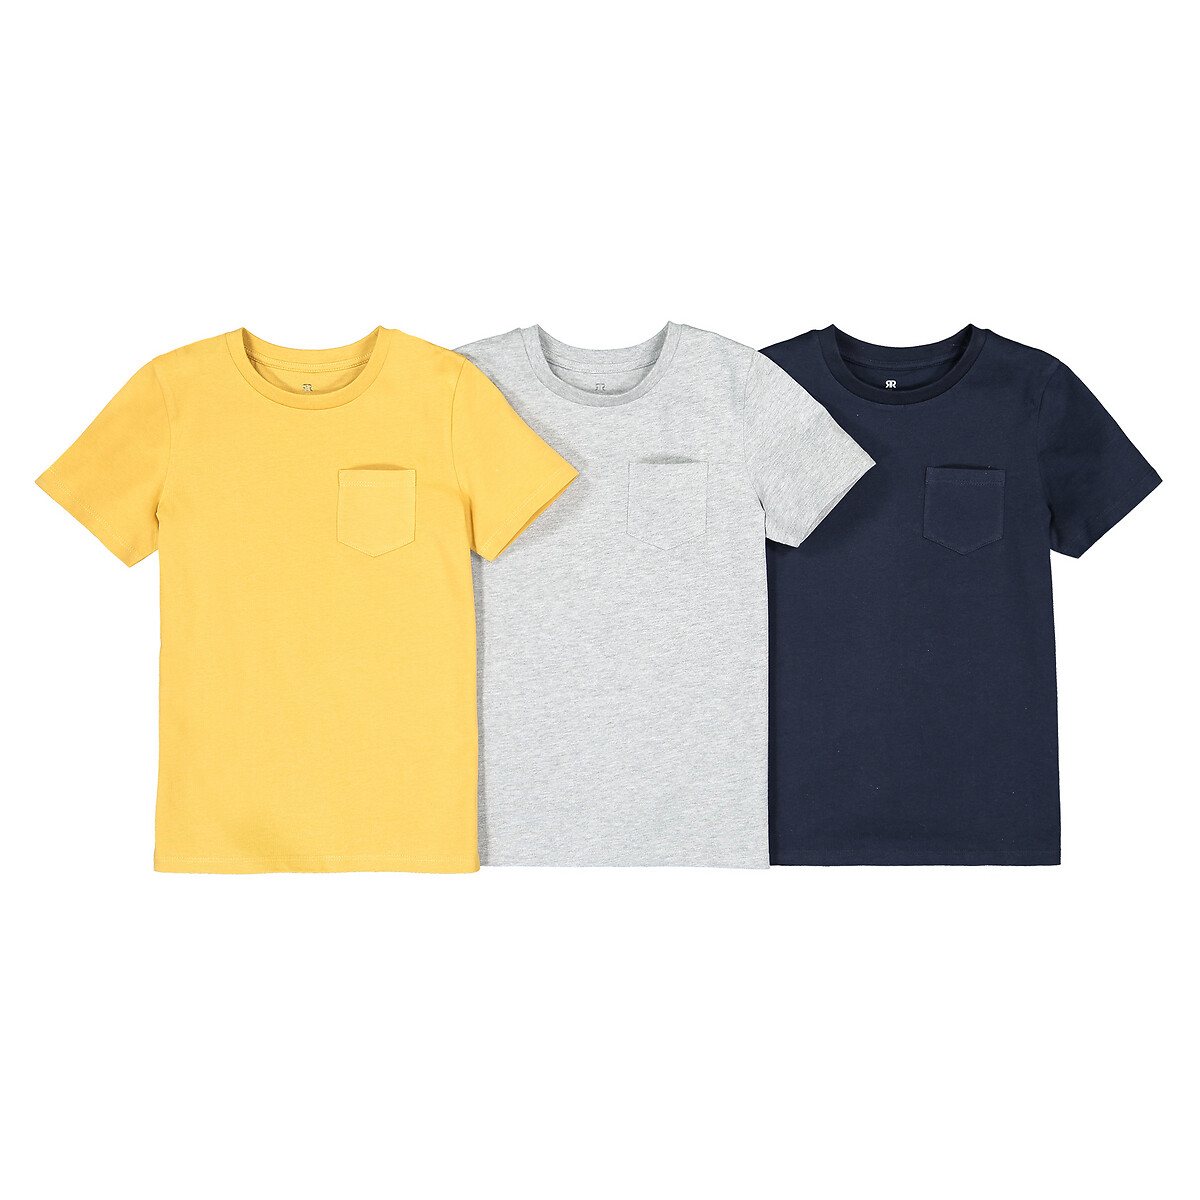 Pack of 3 T-Shirts in Plain Organic Cotton with Crew Neck, 3-12 Years